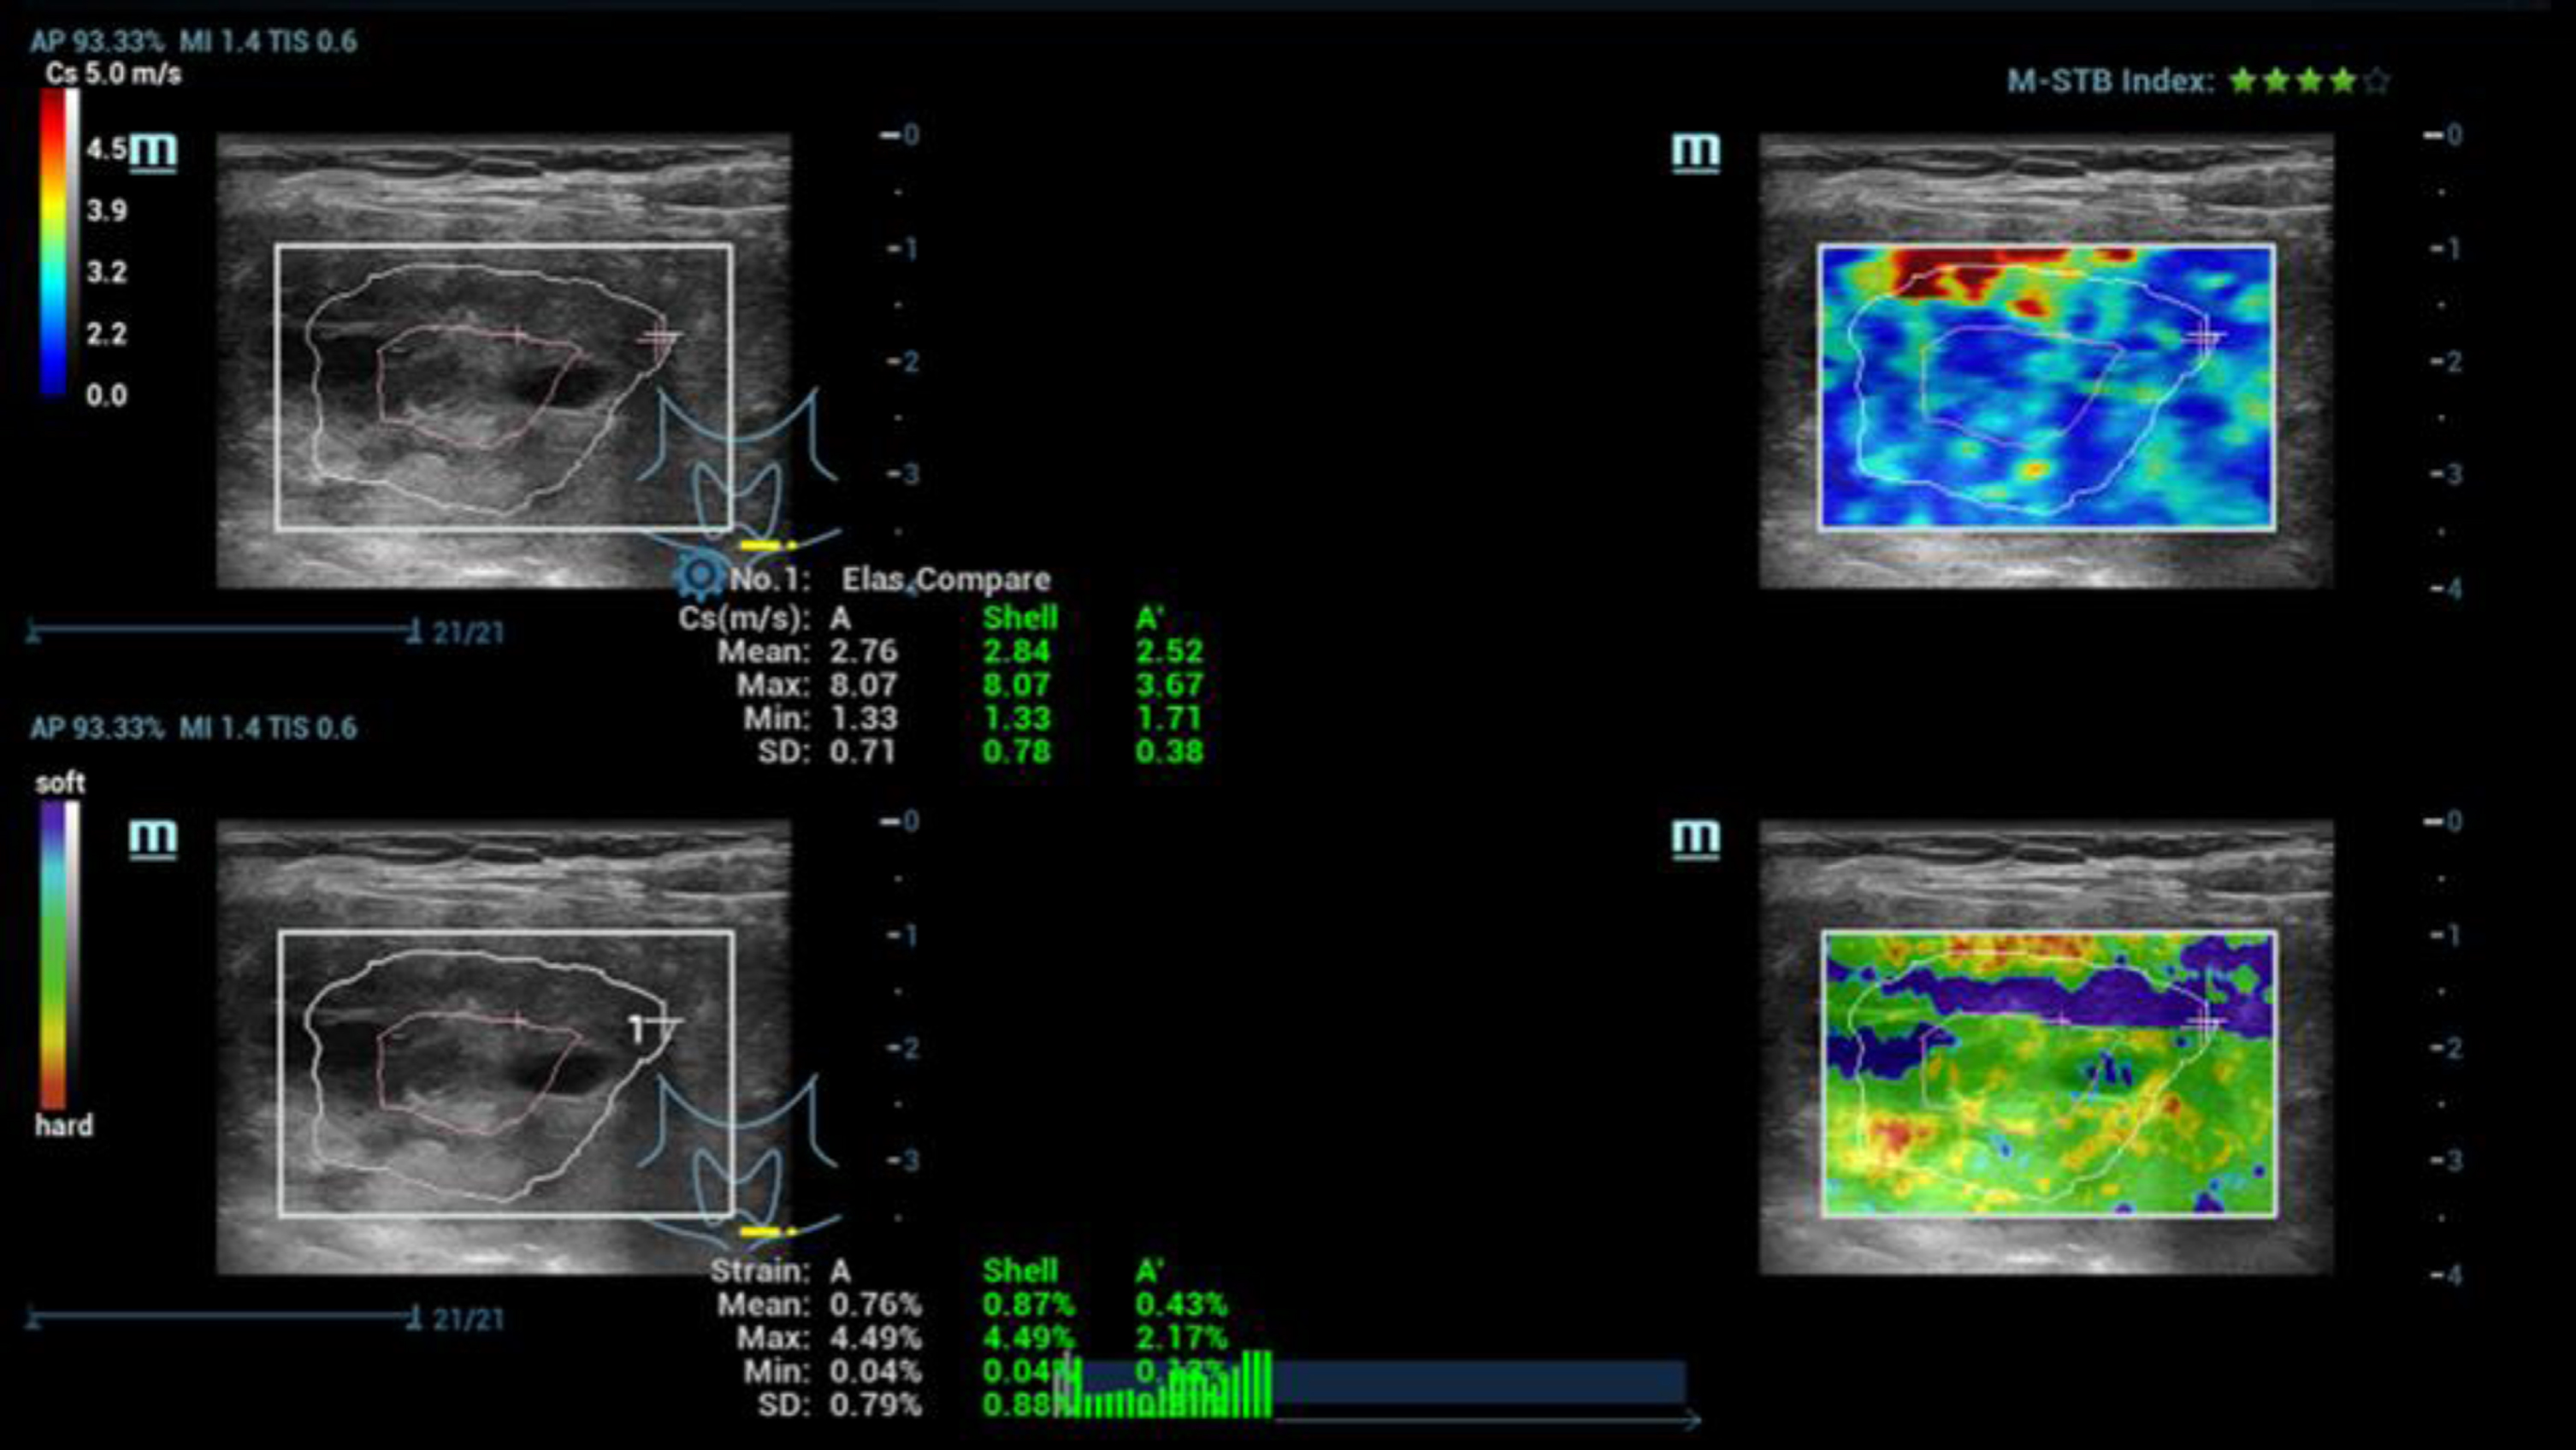 Ultrasound elastography, simultaneous evaluation by strain and shear wave elastography of a suspicious malignant thyroid tumor (TI-RADS IV). Lower stiffness of the center (blue) and irregular higher stiffness at the margin (yellow and red) with values up to 2.5 m/s.